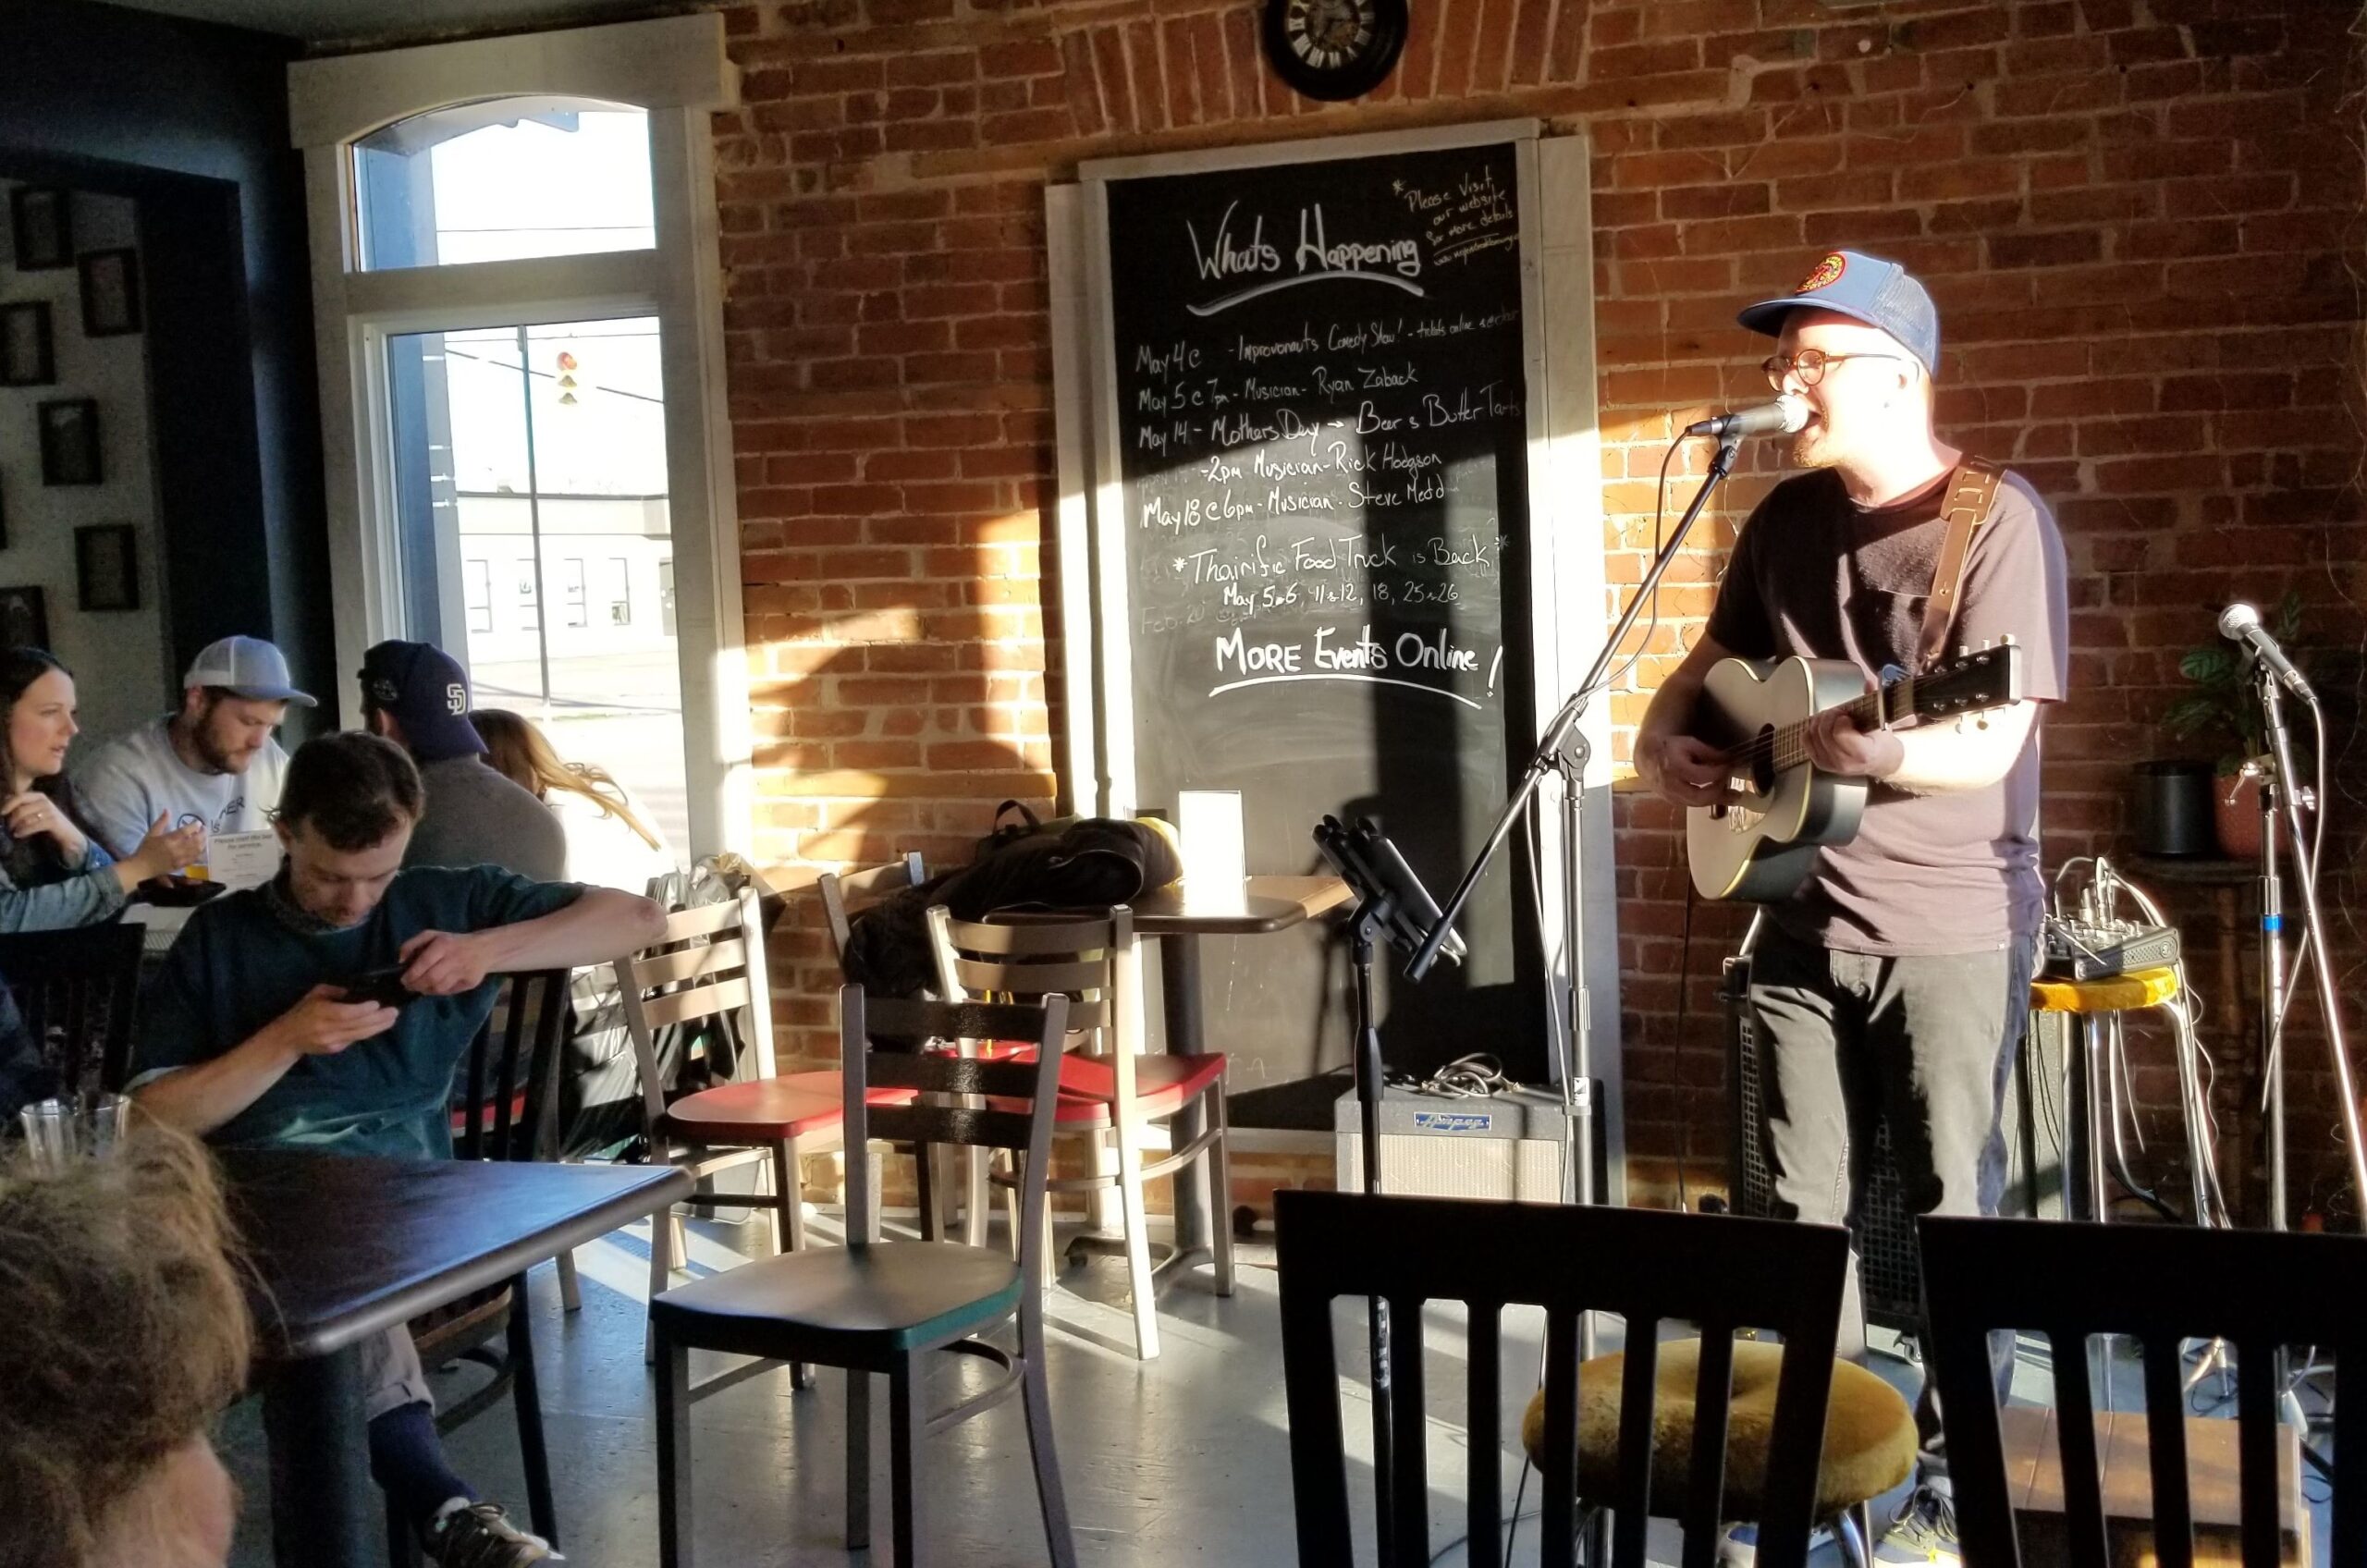 photo of a performer at the brewery. Holding guitar and singing